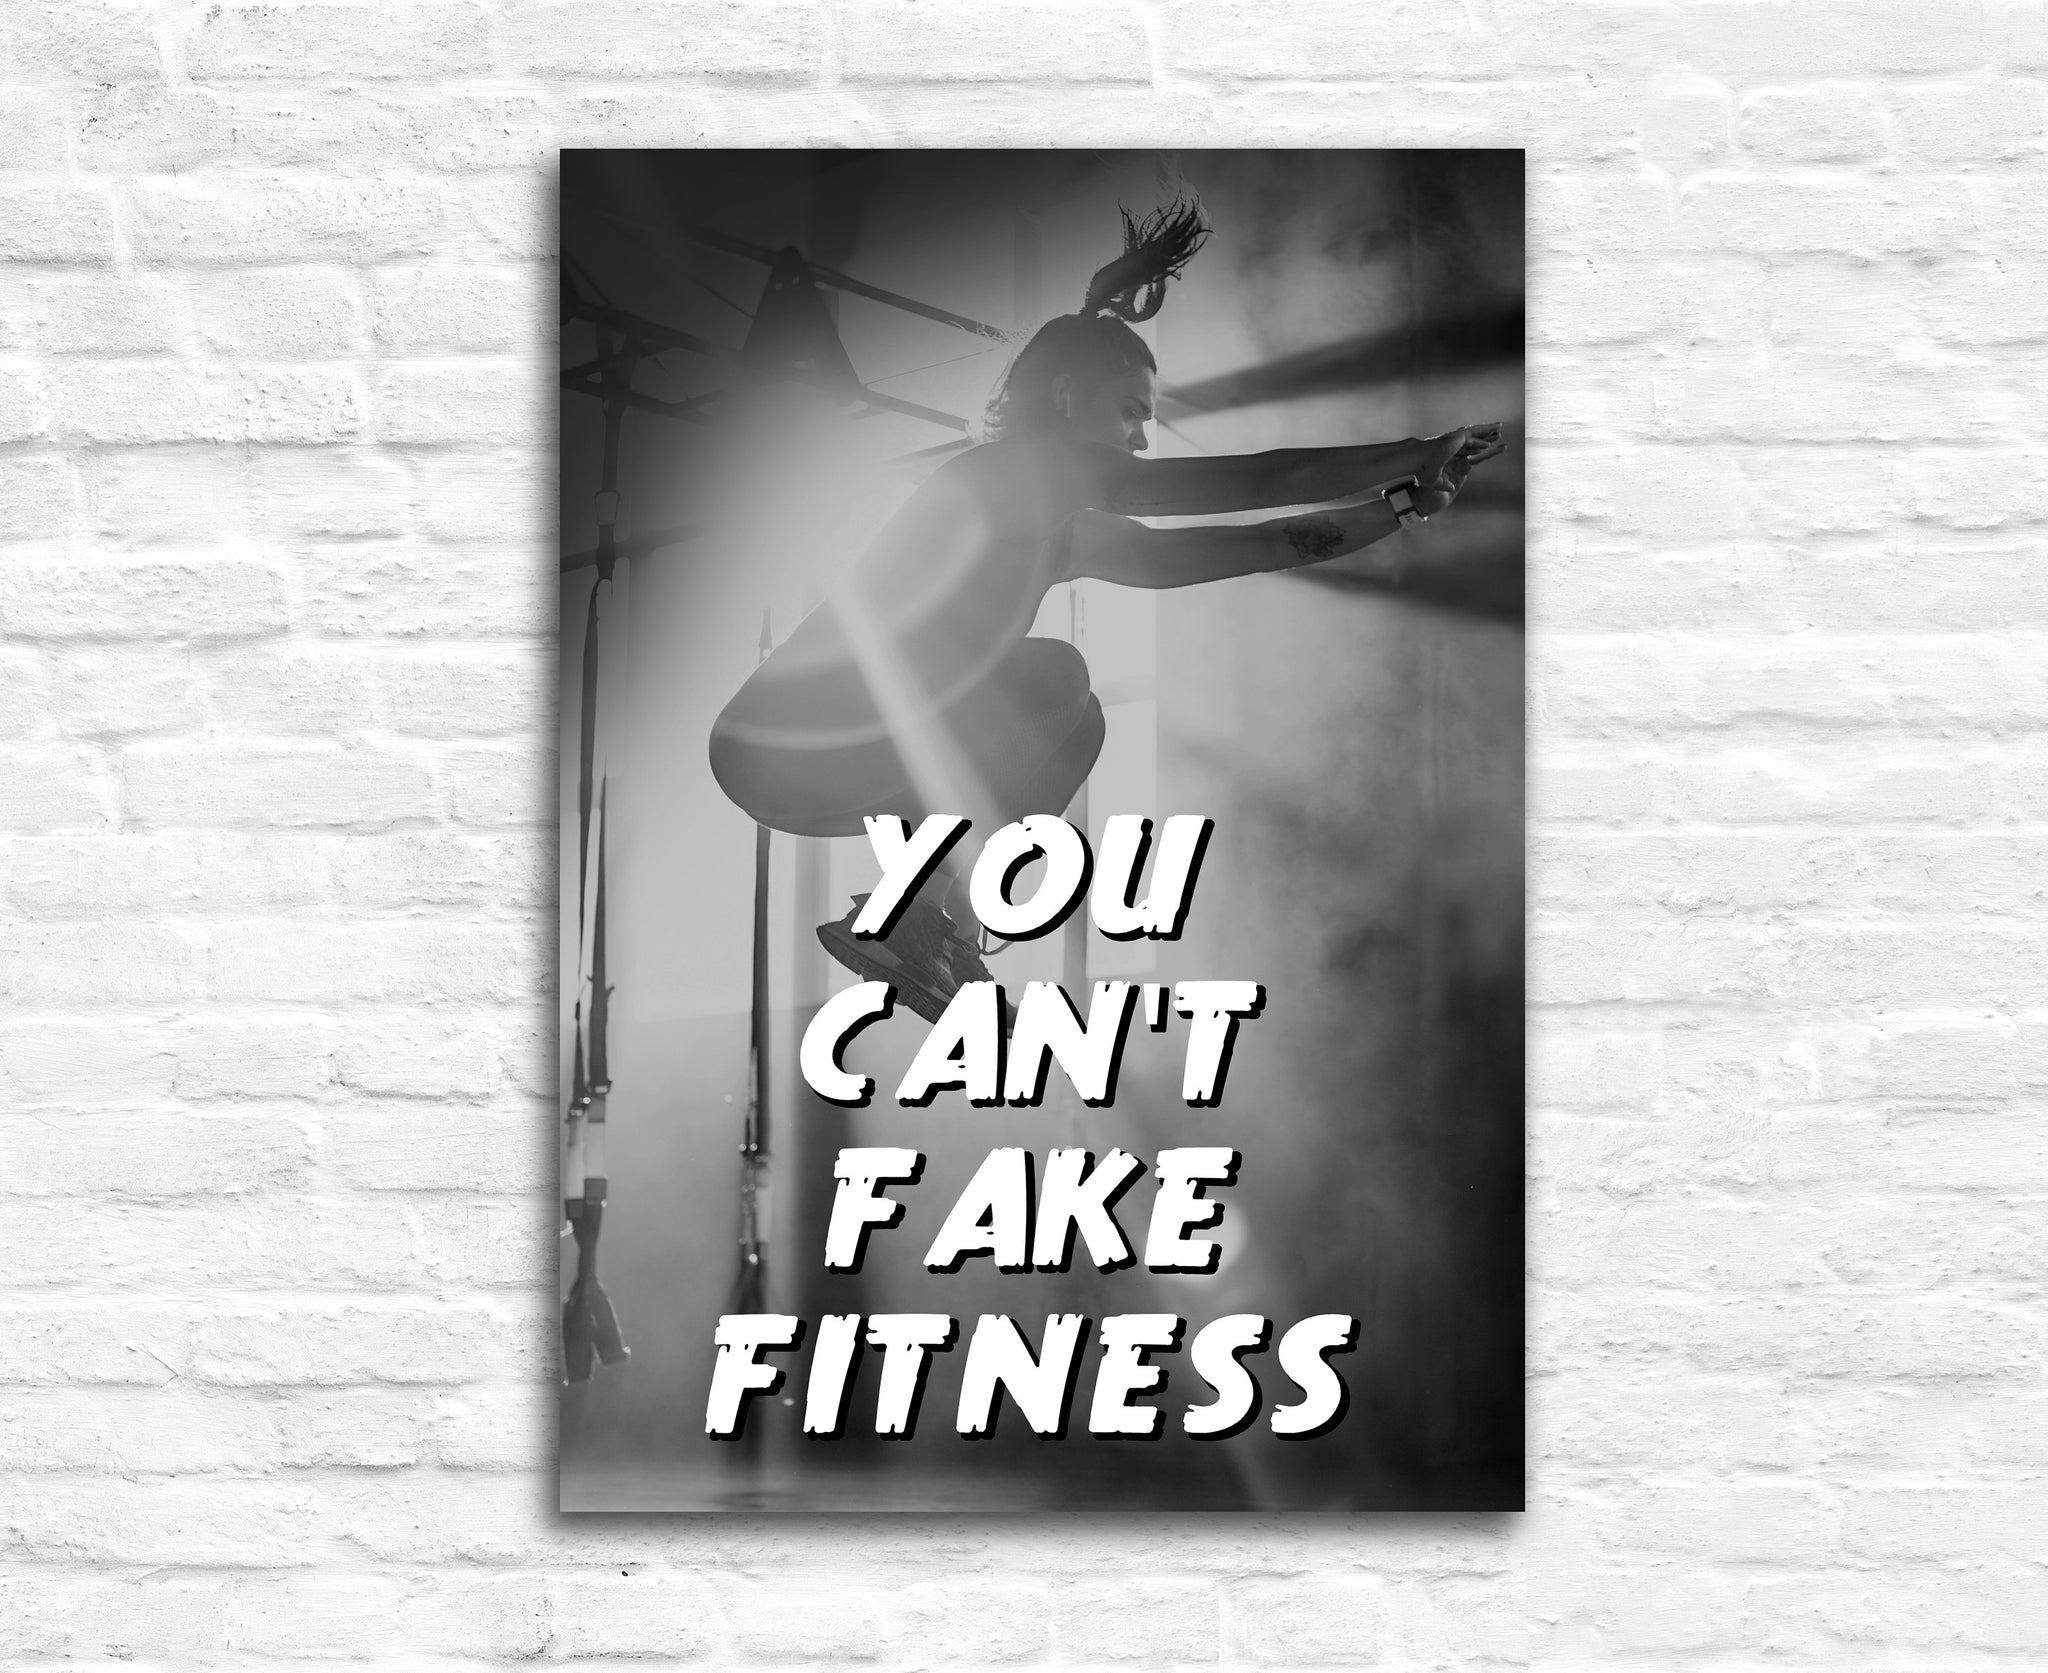 You can't fake fitness, GYM Quotes, Gym Posters, Fitness Quotes, GYM Wall Decor, Home Wall Decor, GYM Prints, Gym wall art, Motivation Art